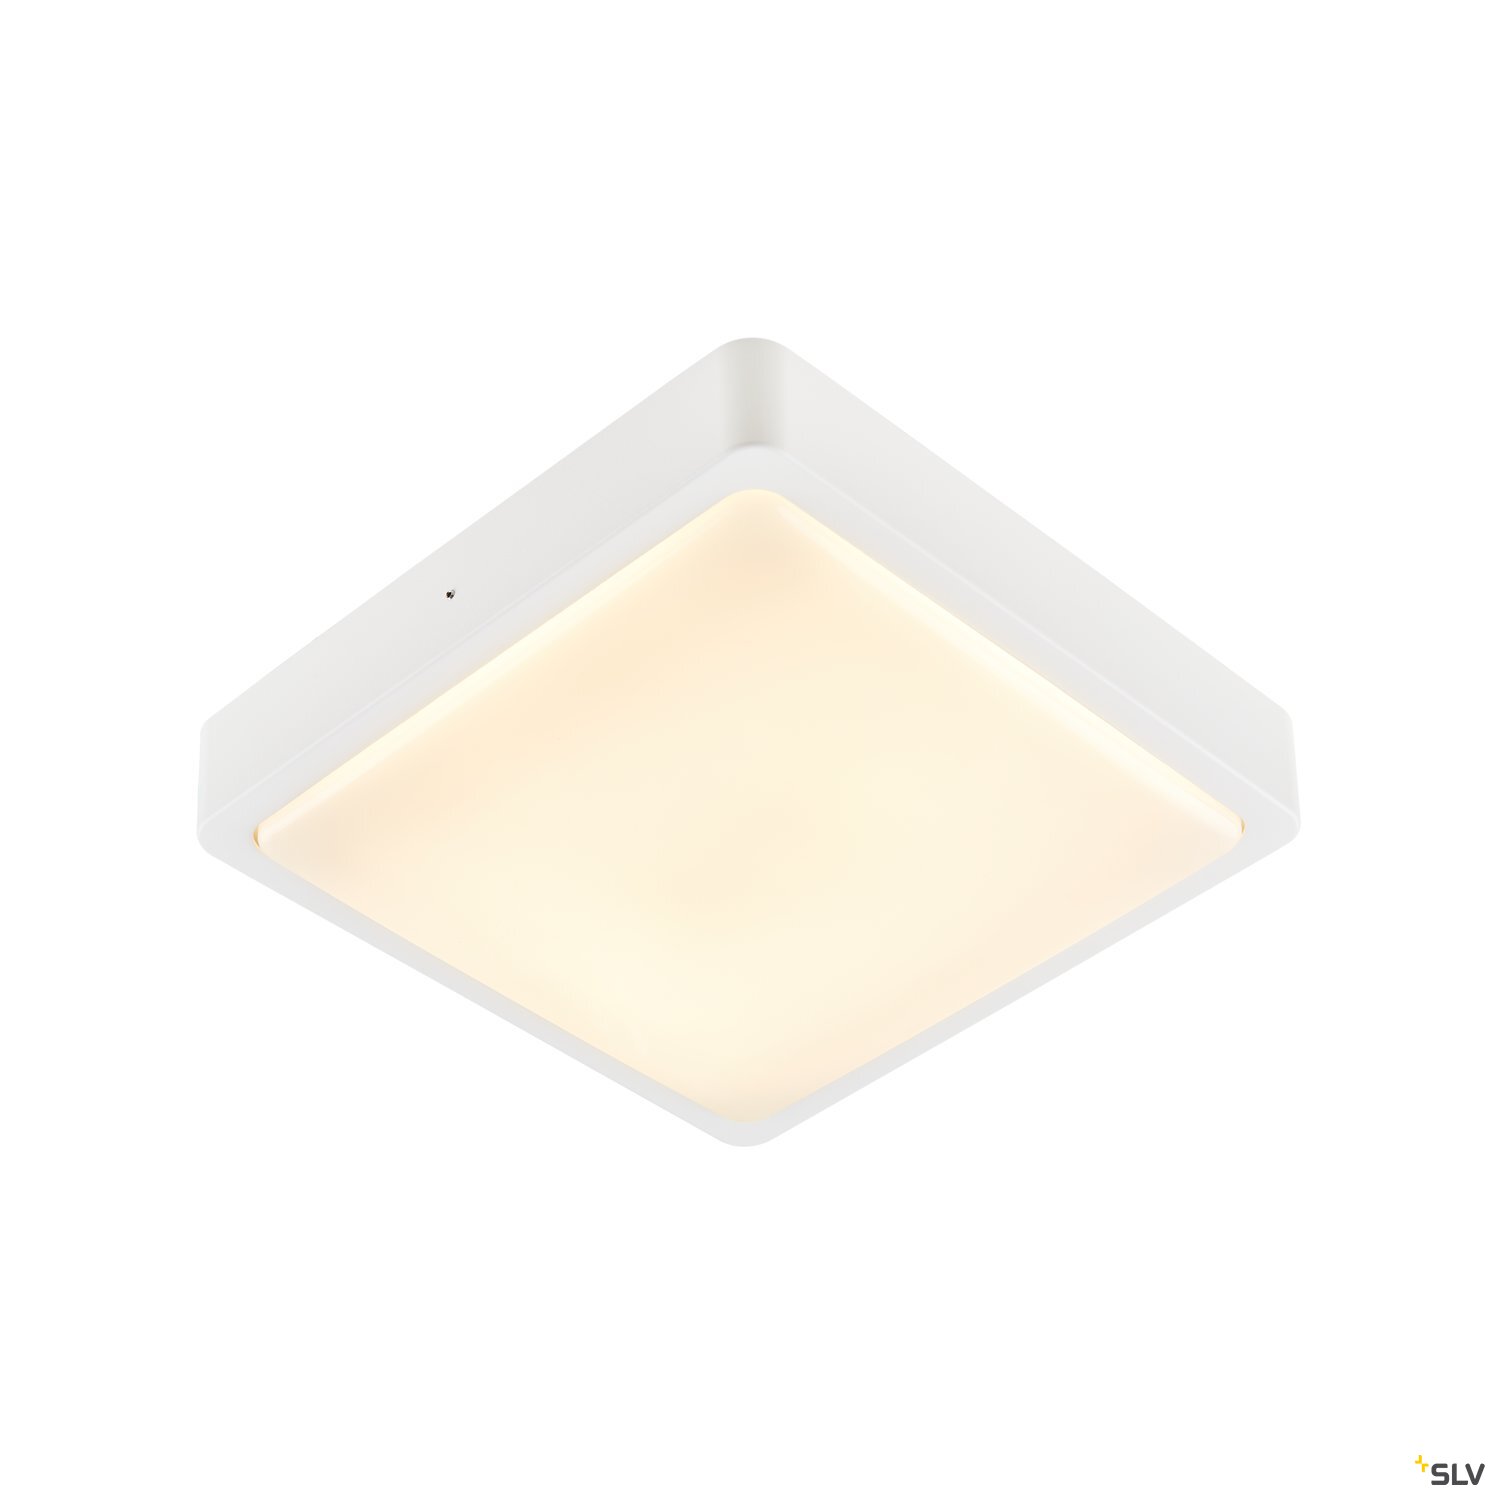 SLV LED Ceiling Light AINOS SQUARE, 3000/4000K, with Motion Detector, square, white, IP65 1300lm